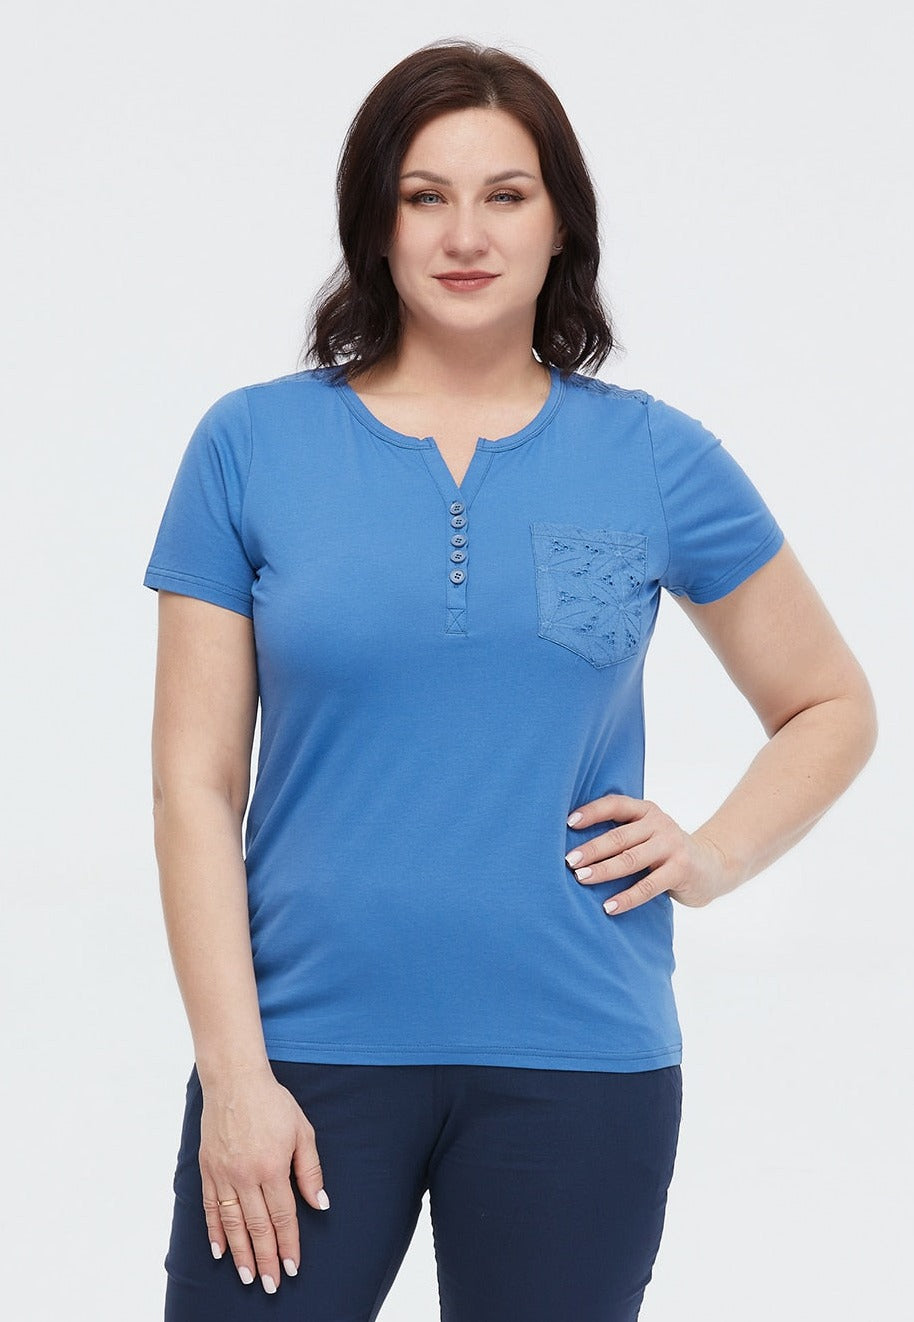 V-neck Button Plus Size Women's Cotton Tee| All For Me Today